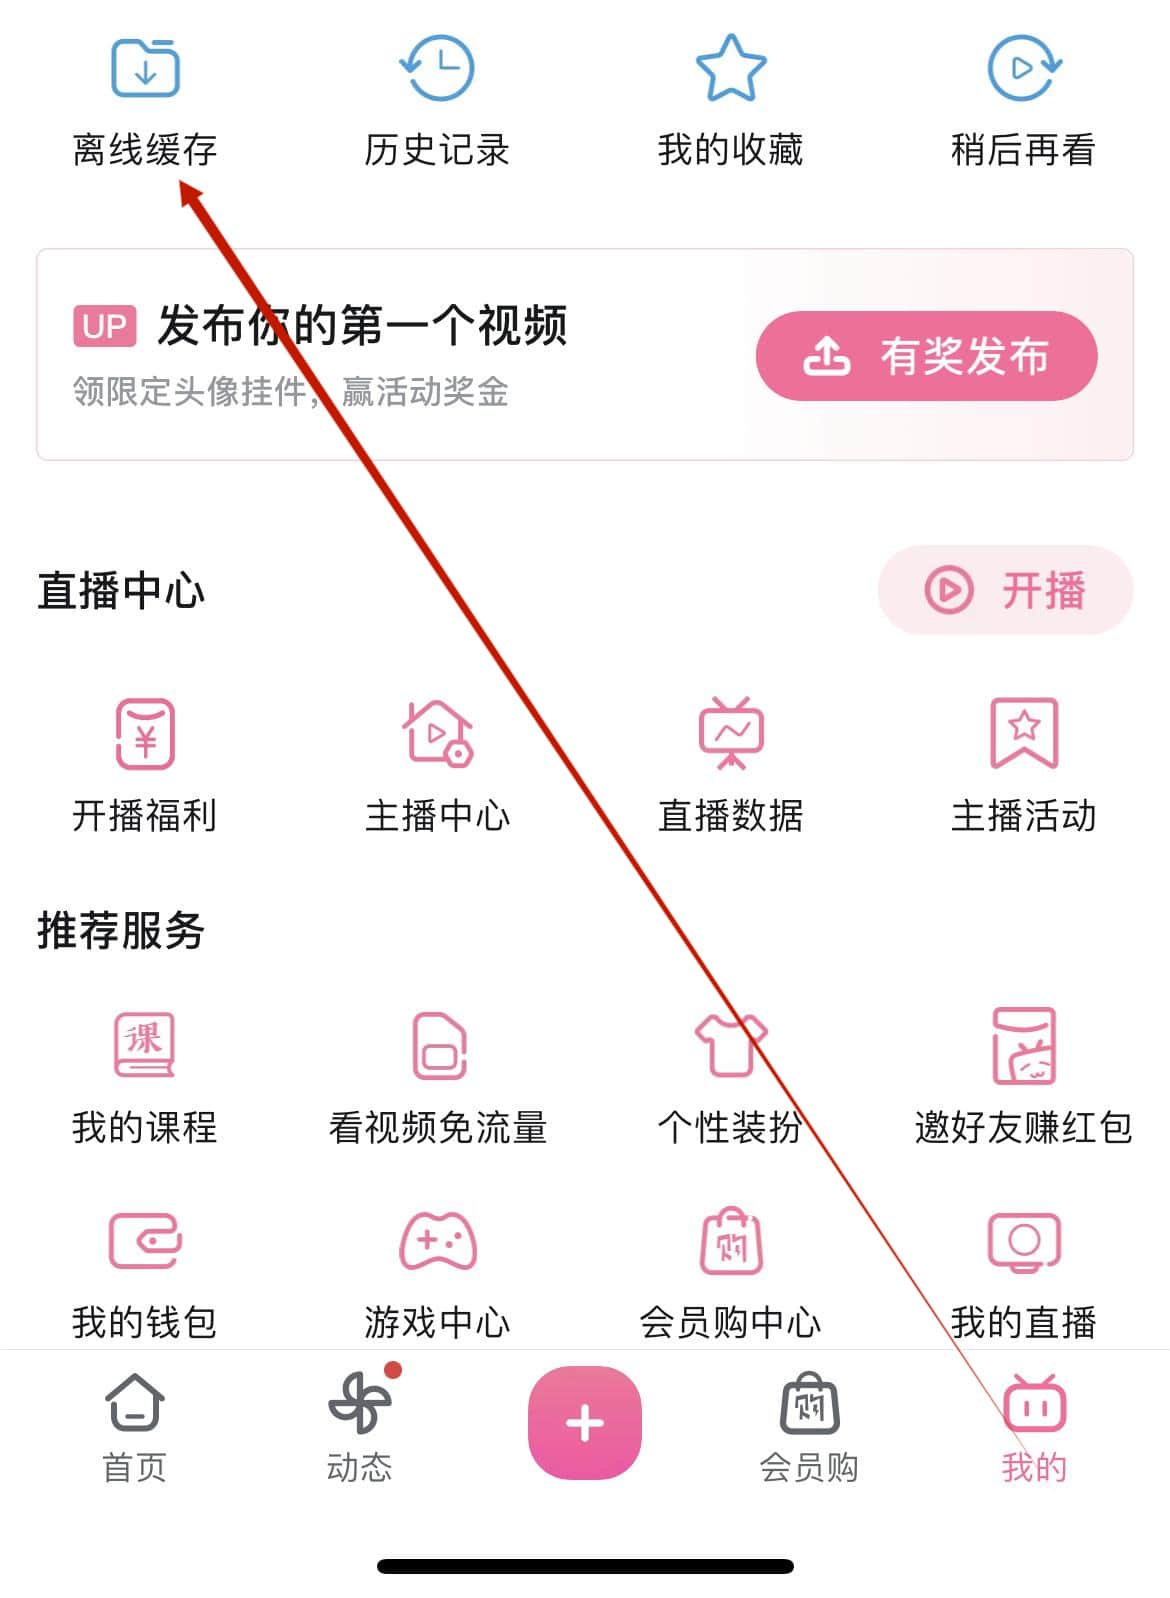 view downloaded videos in mobile Bilibili app